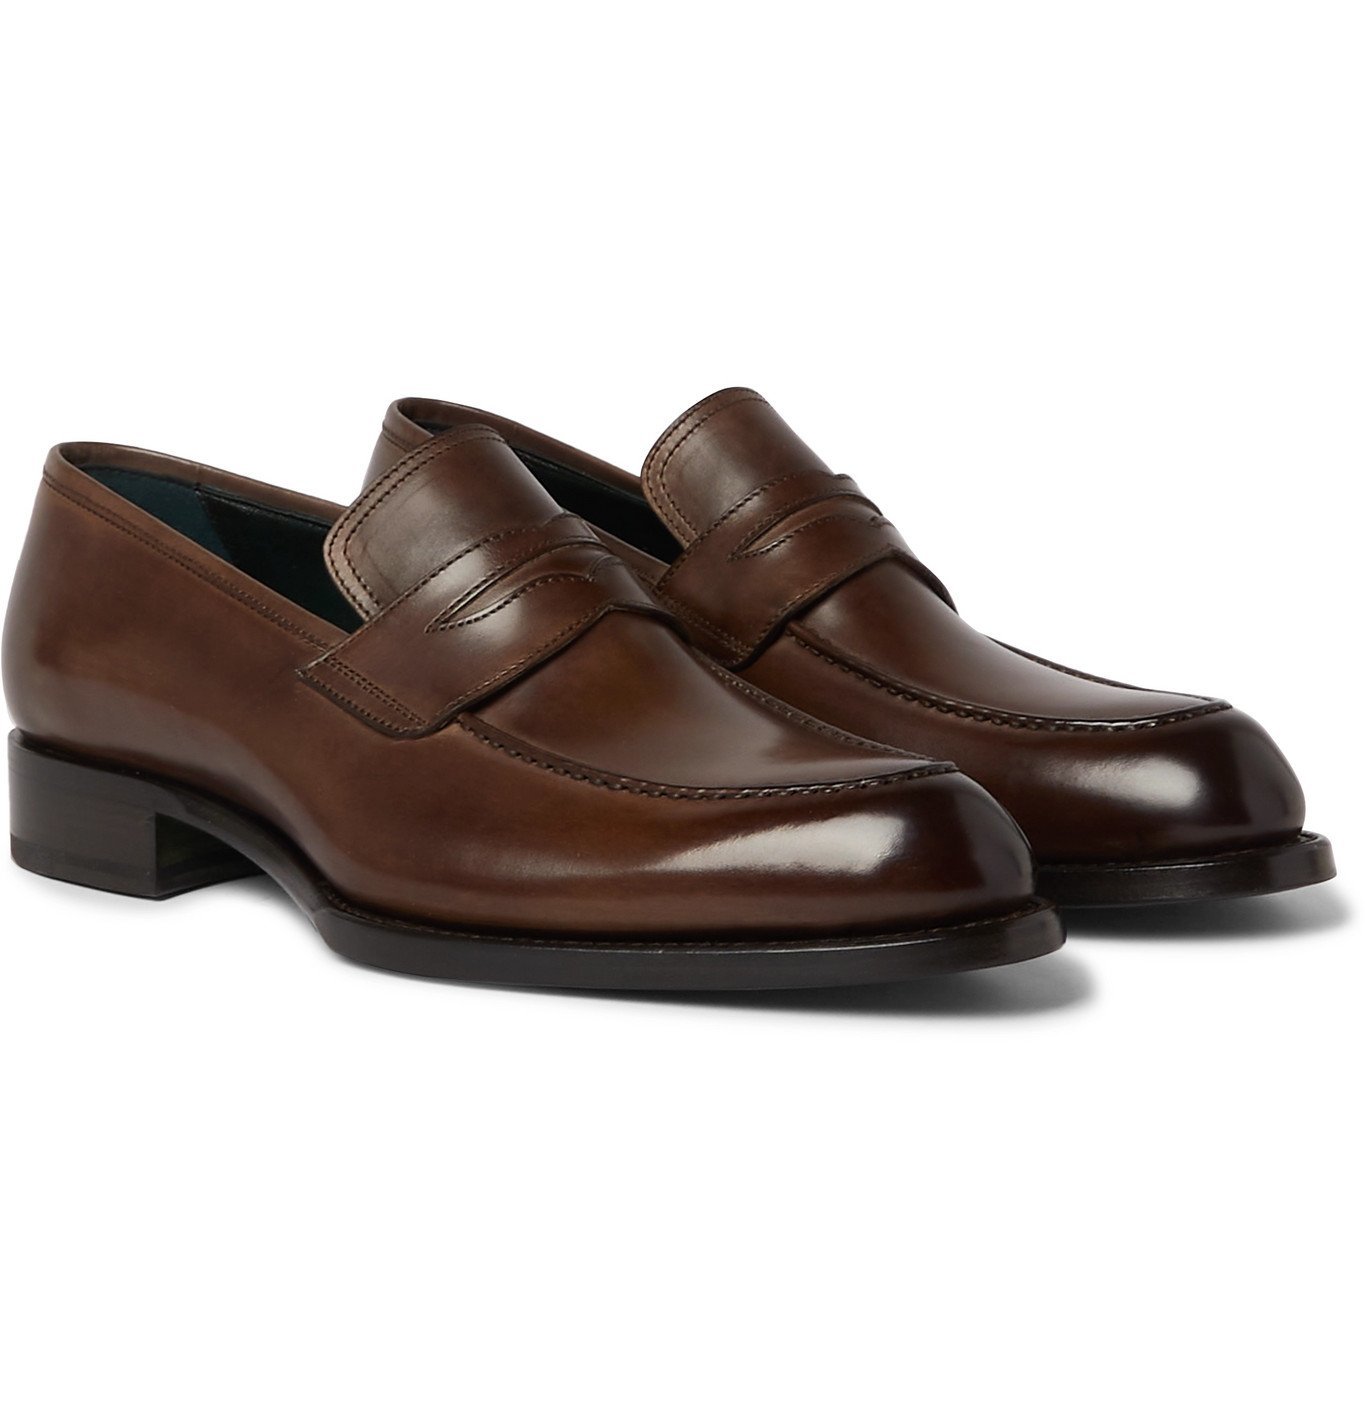 BRIONI - Polished-Leather Penny Loafers - Brown Brioni